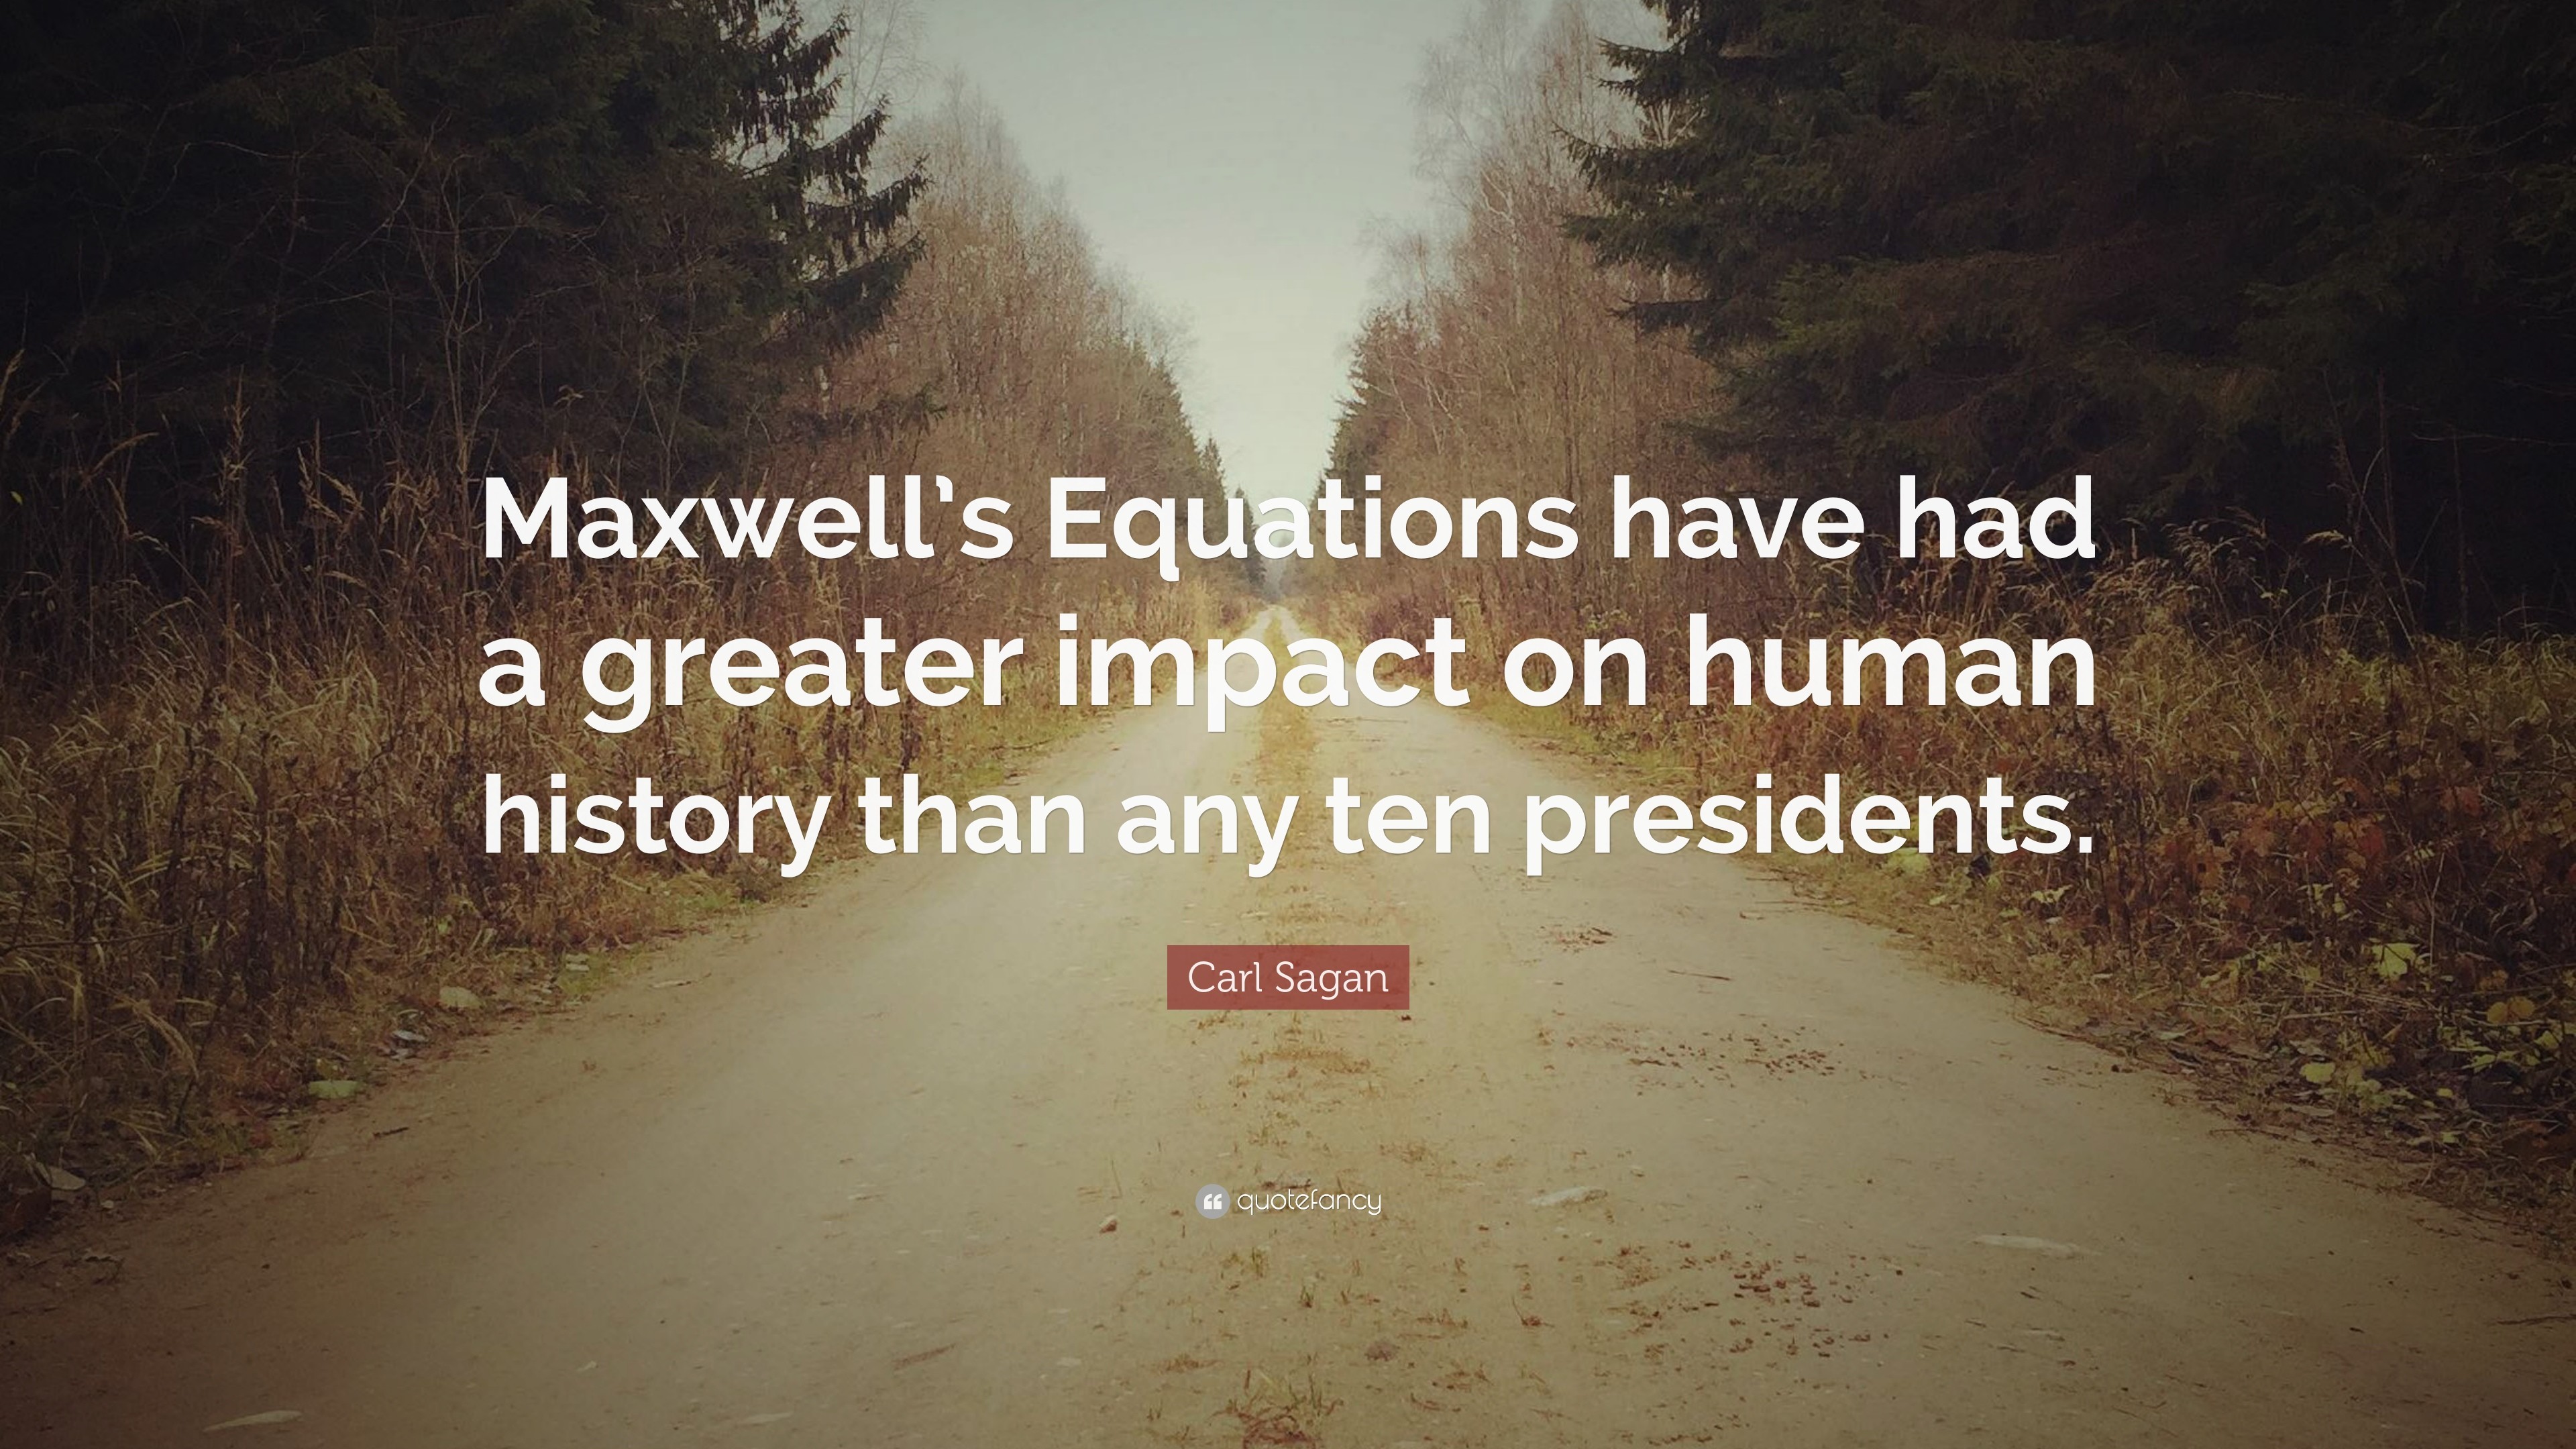 3840x2160 Carl Sagan Quote: “Maxwell's Equations have had a greater impact on human  history than